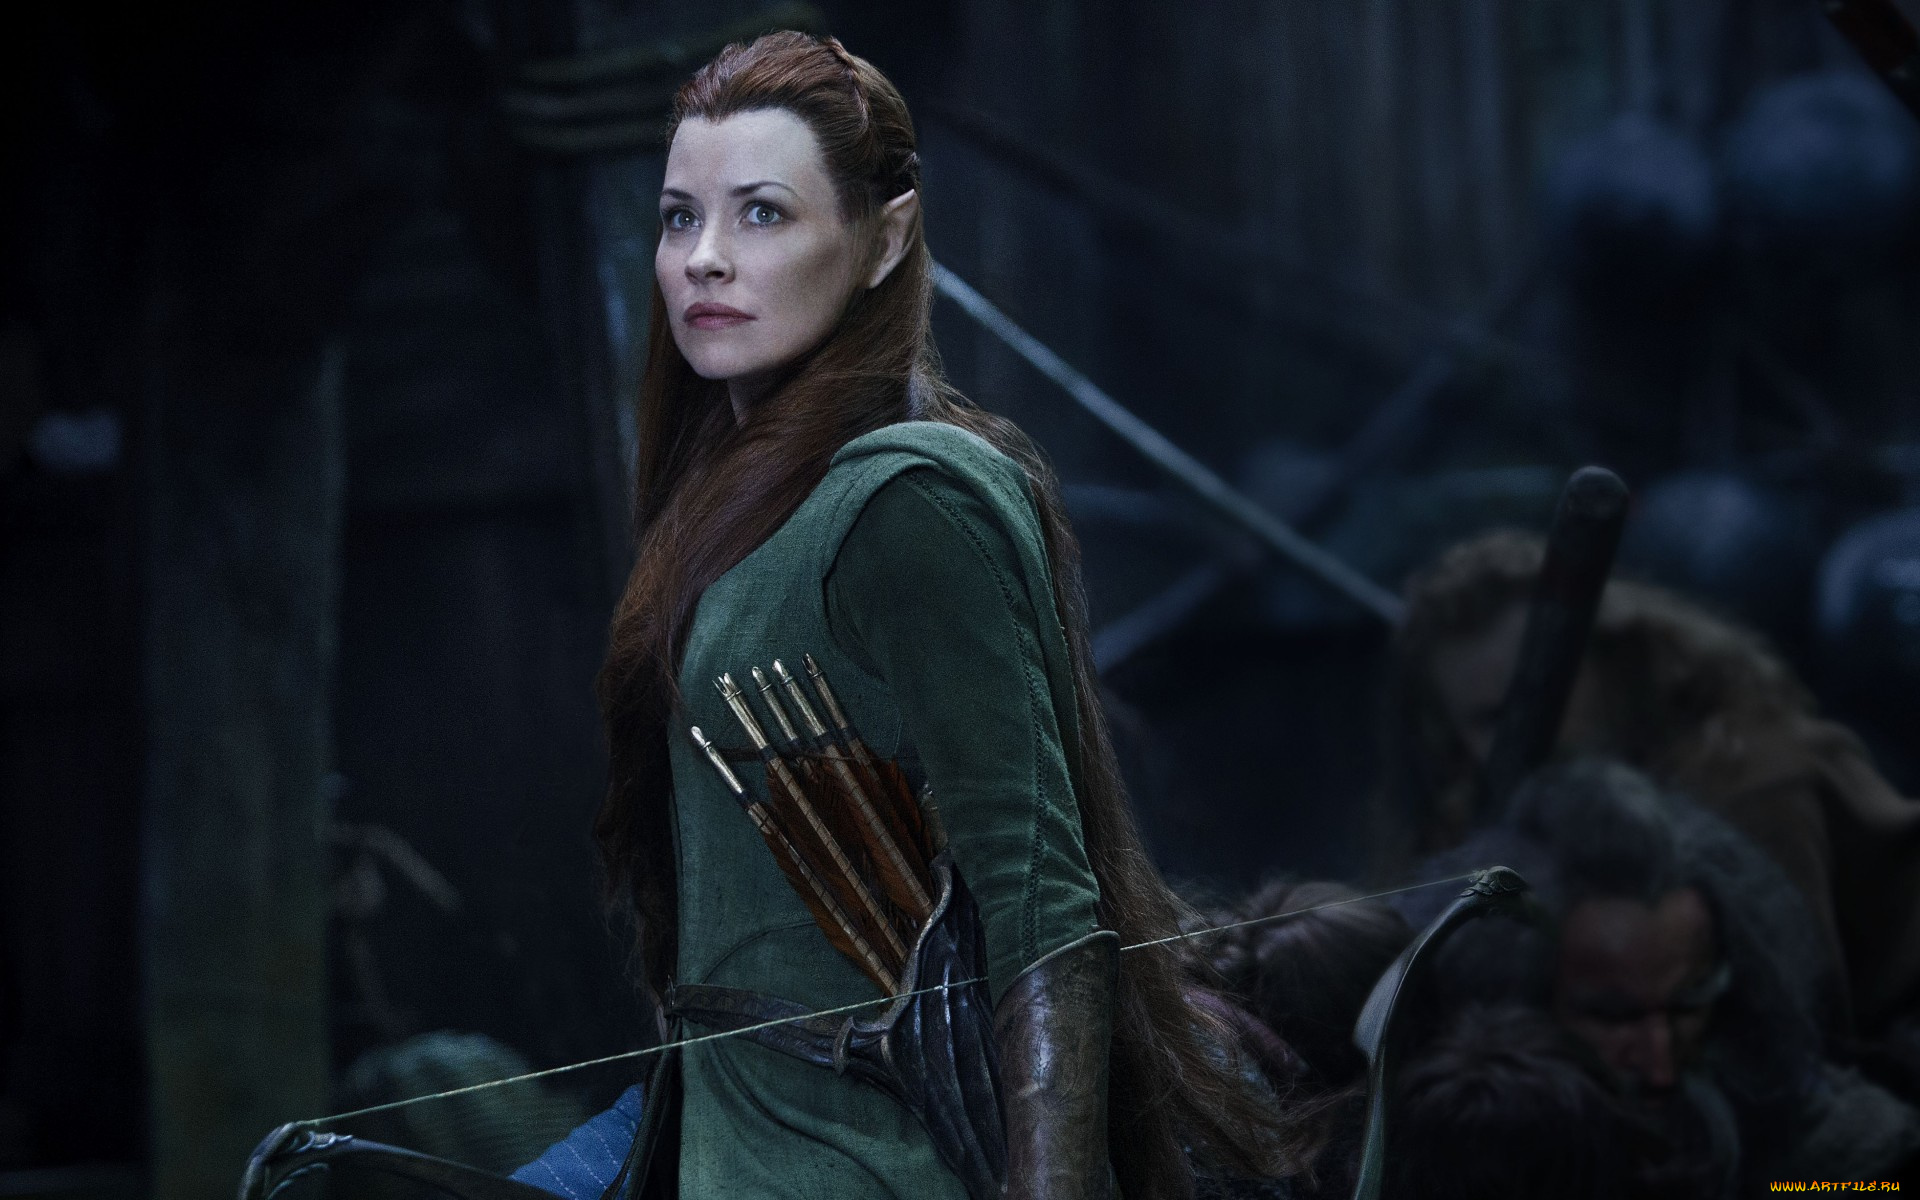 кино, фильмы, the, hobbit, , the, battle, of, the, five, armies, tauriel, evangeline, lilly, 2014, film